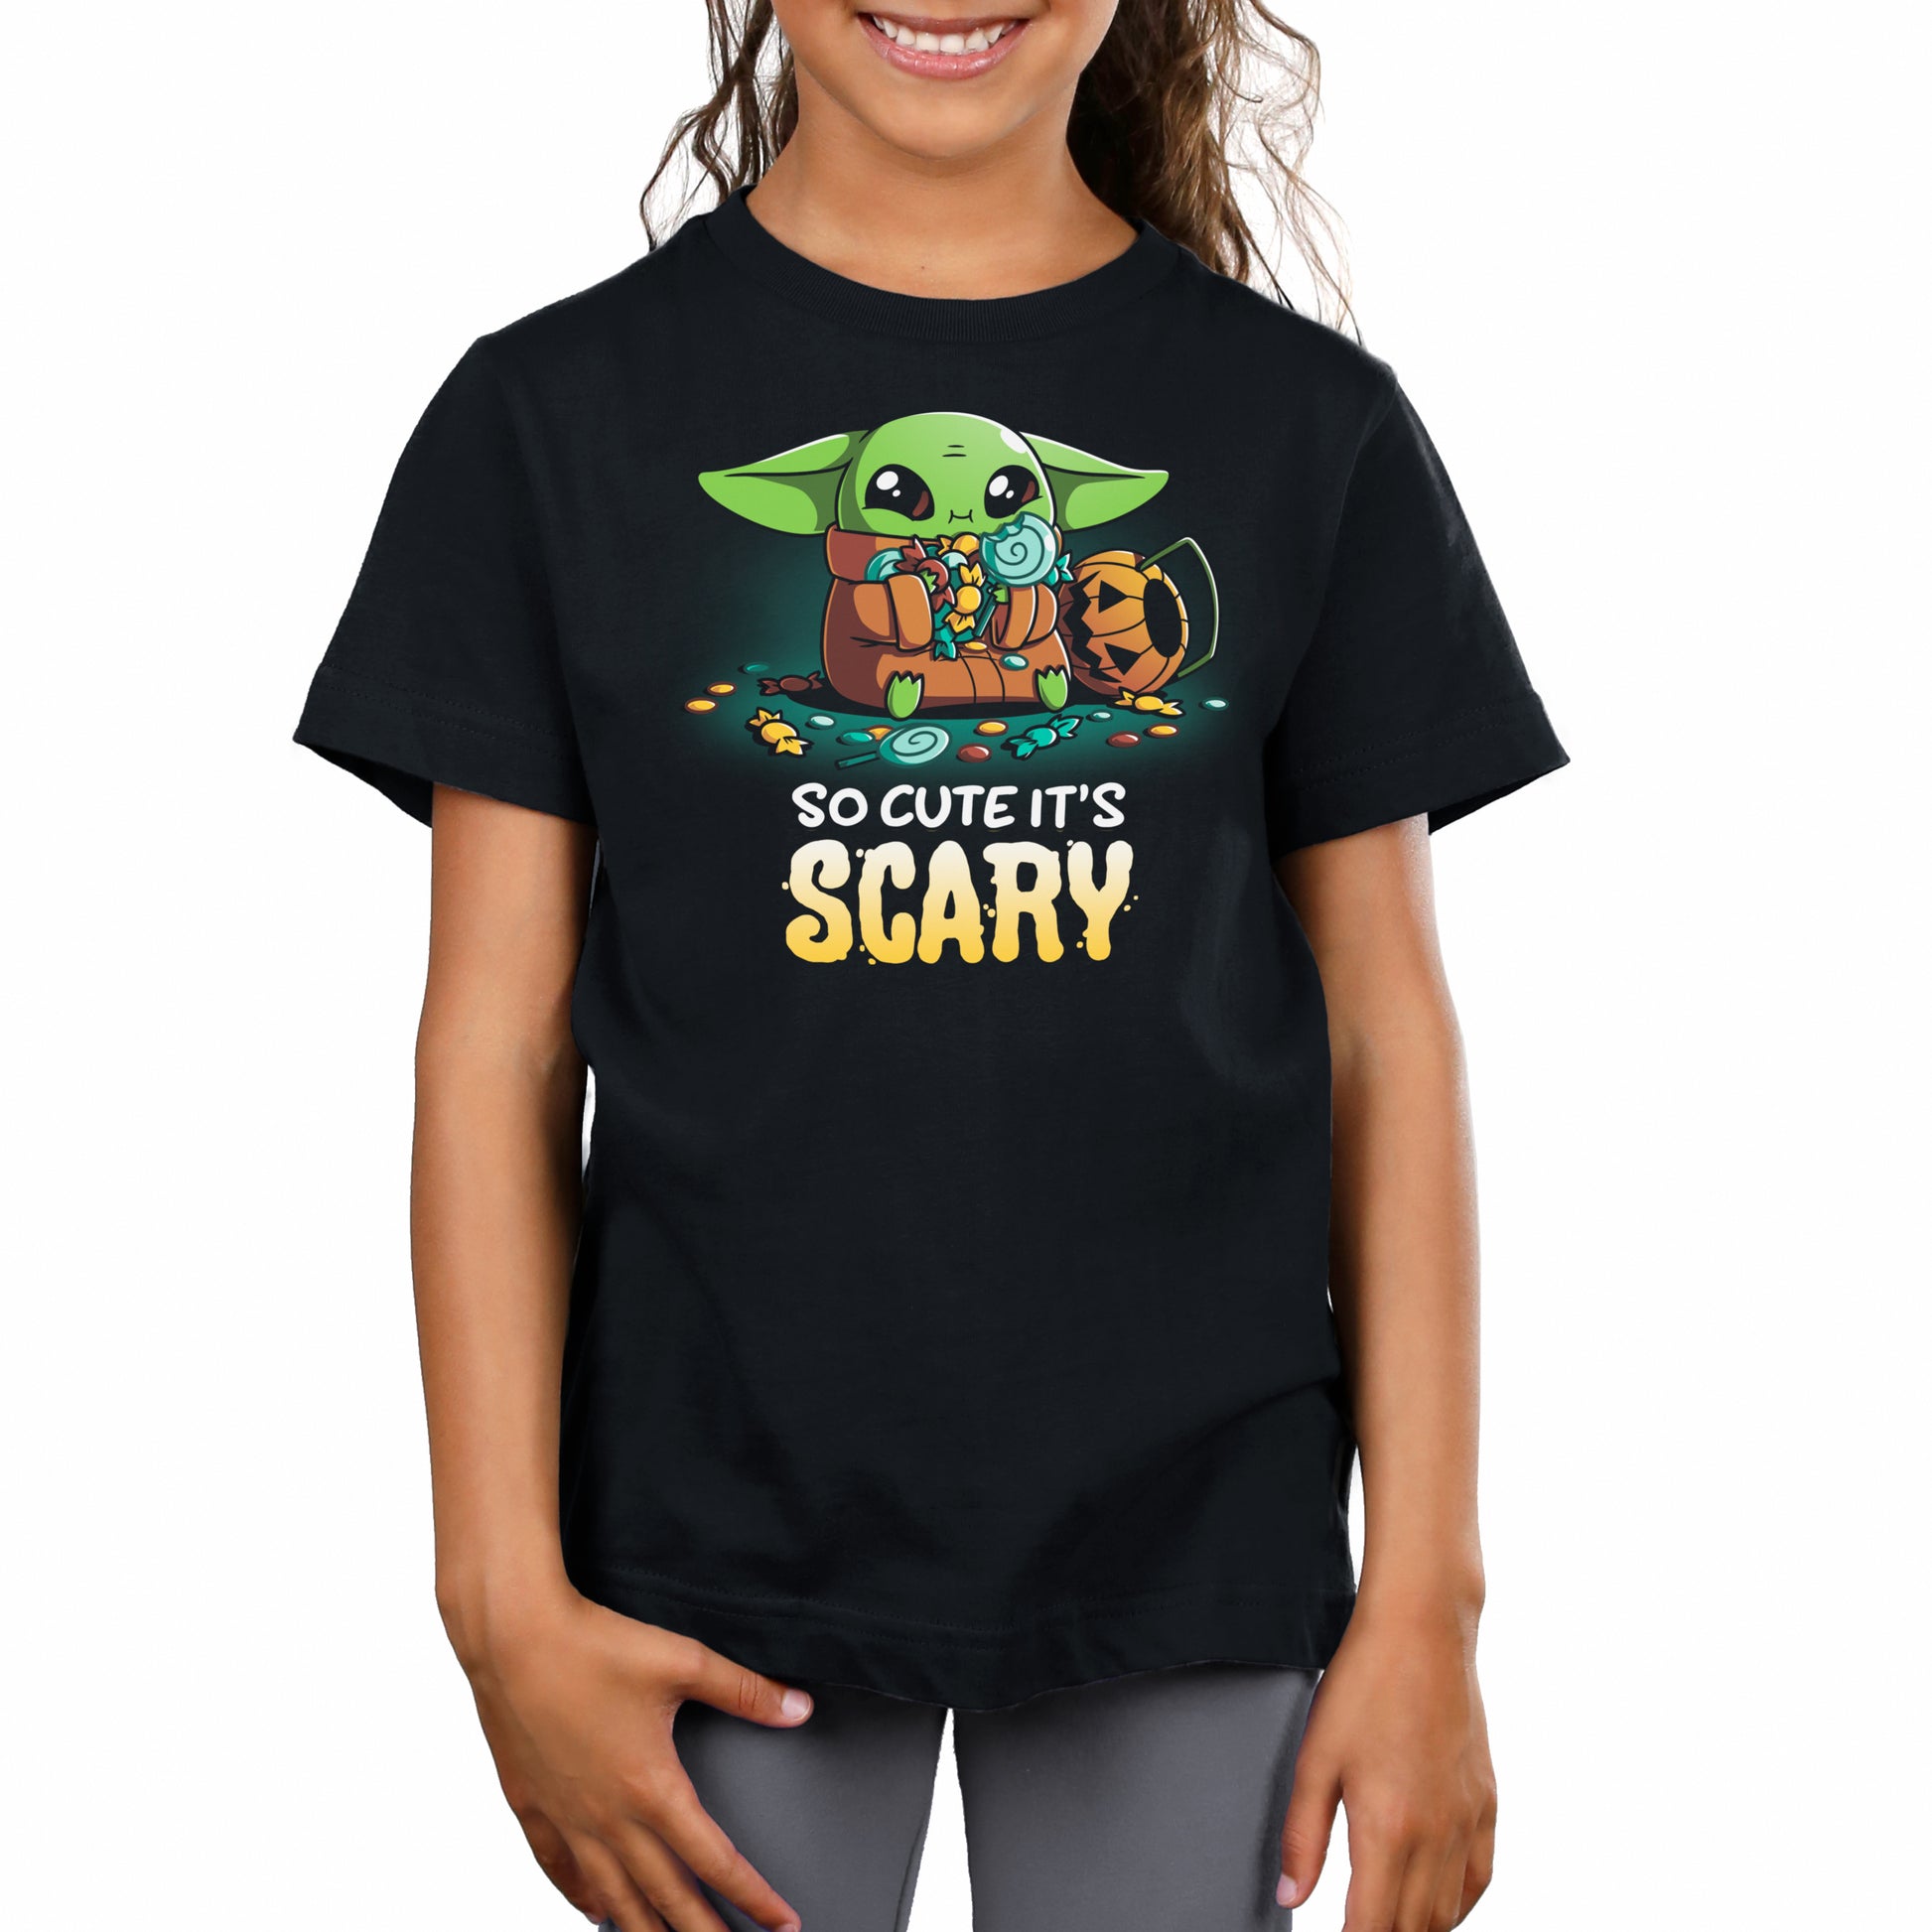 A girl wearing a So Cute It's Scary t-shirt, showing off her Star Wars obsession.